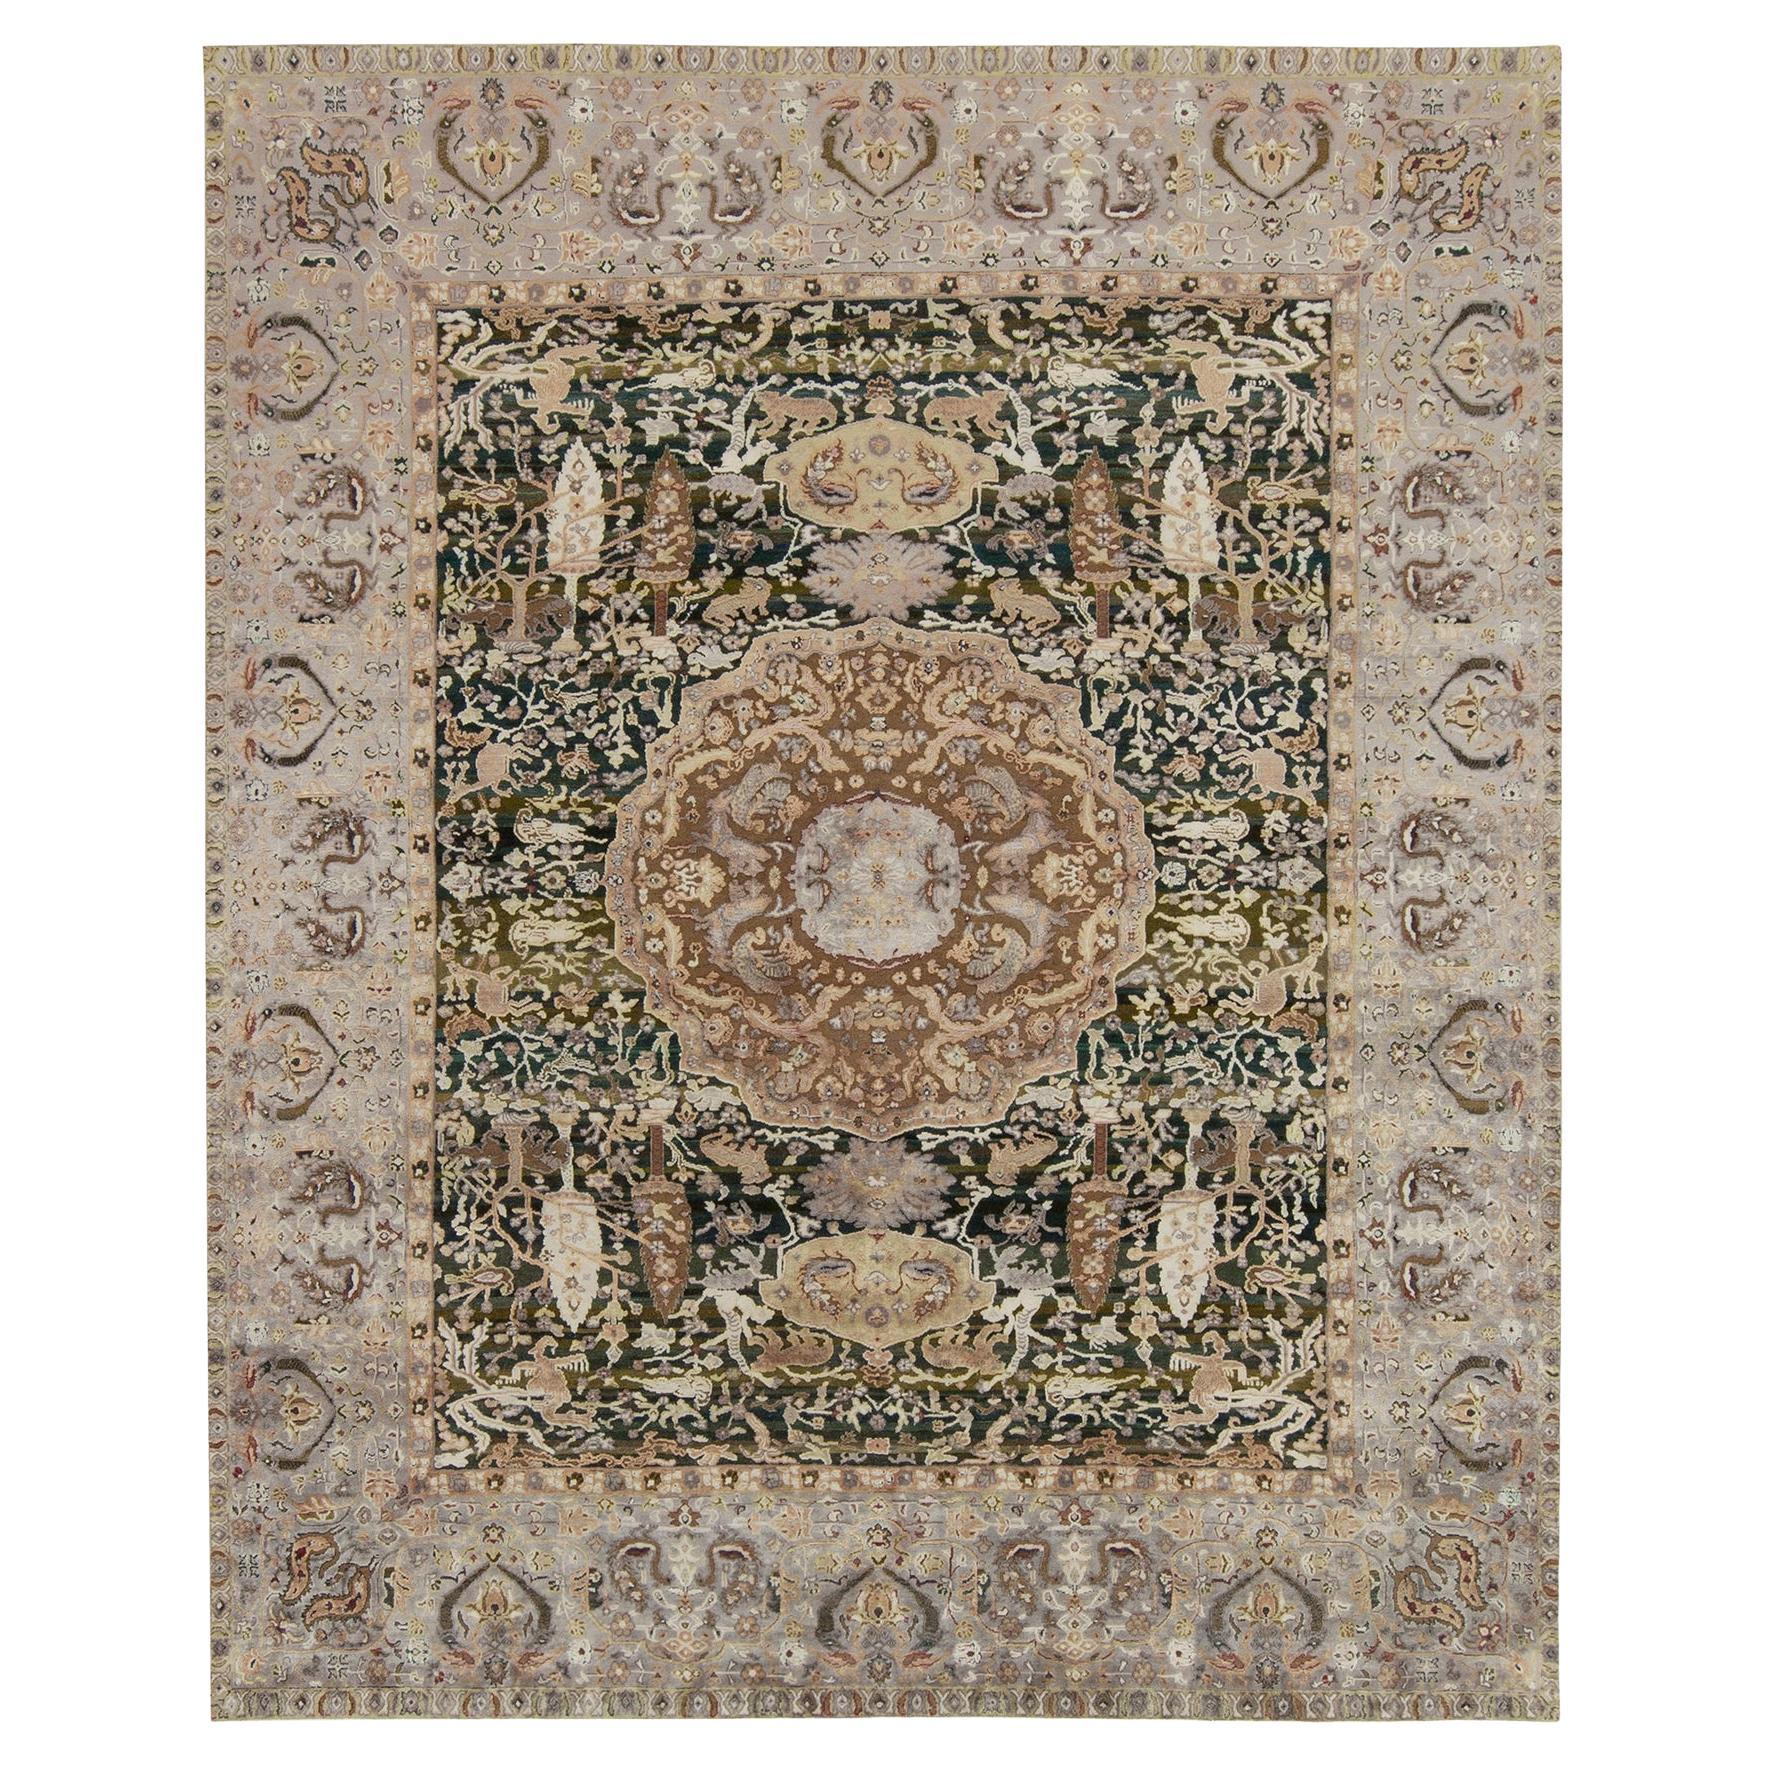 Rug & Kilim’s Classic Style Rug in Gray and Beige-Brown Floral Pattern For Sale